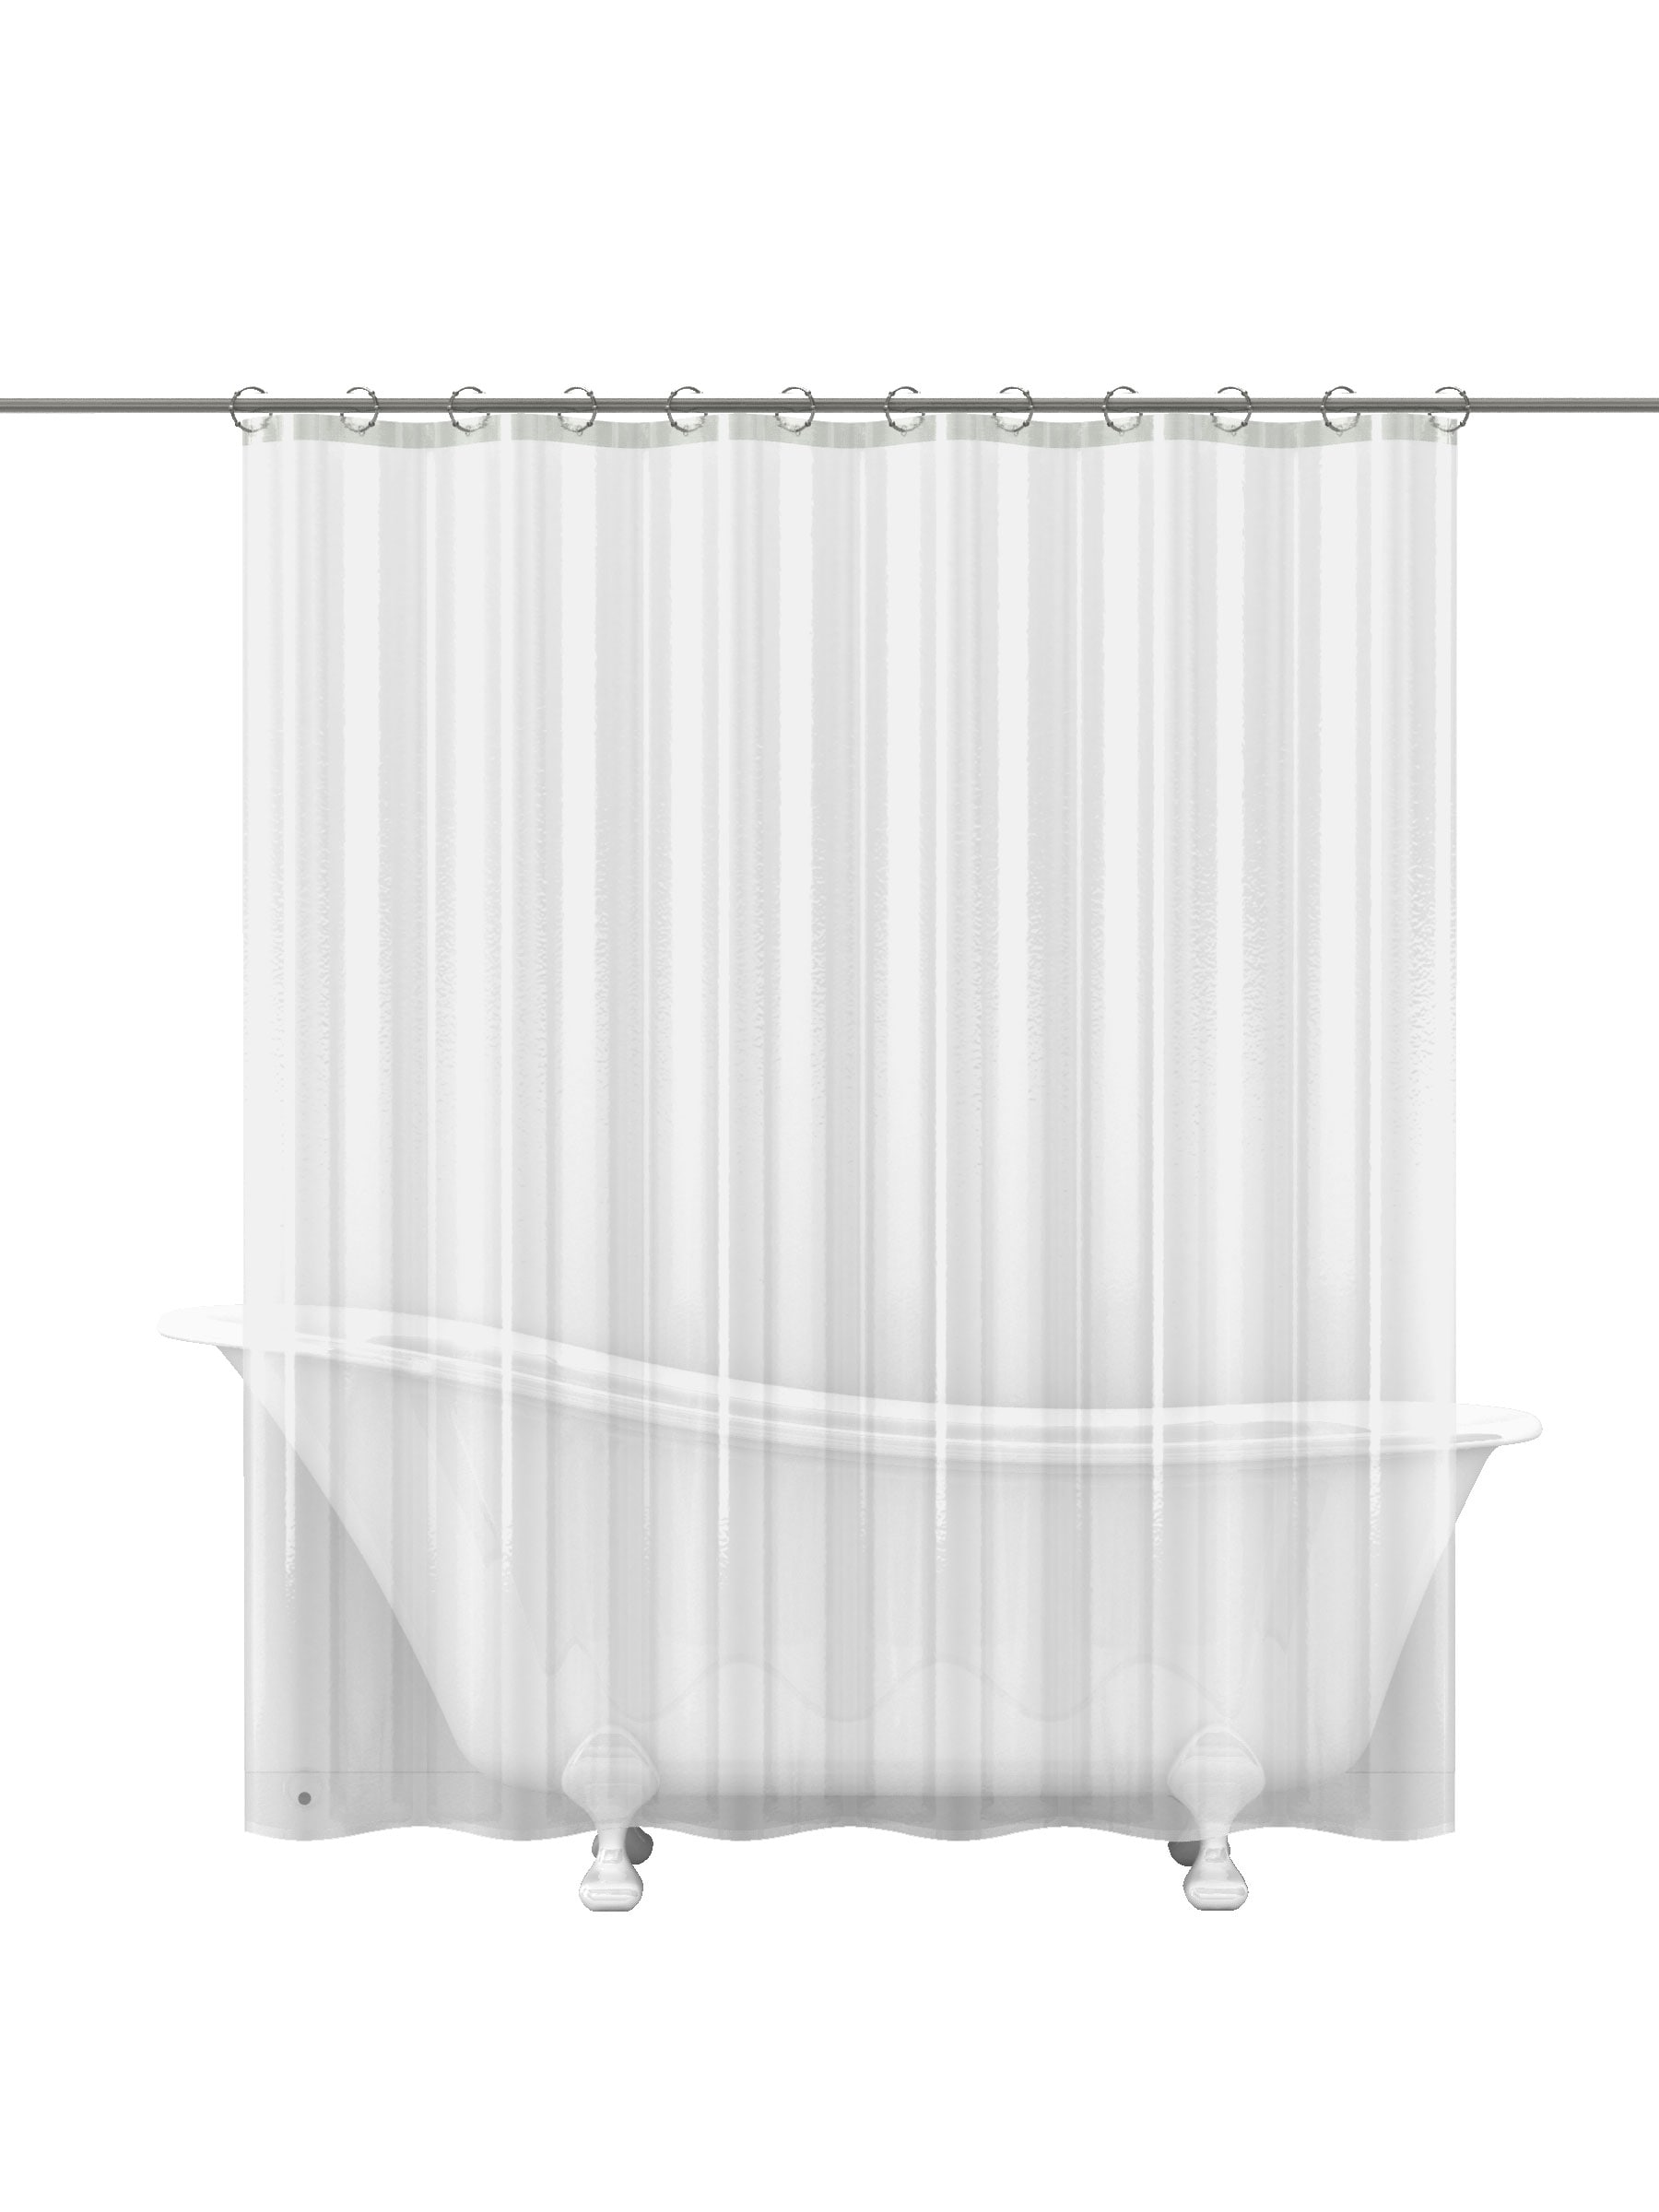 Shower Curtains Liners At Com, 76 Inch Fabric Shower Curtain Rod